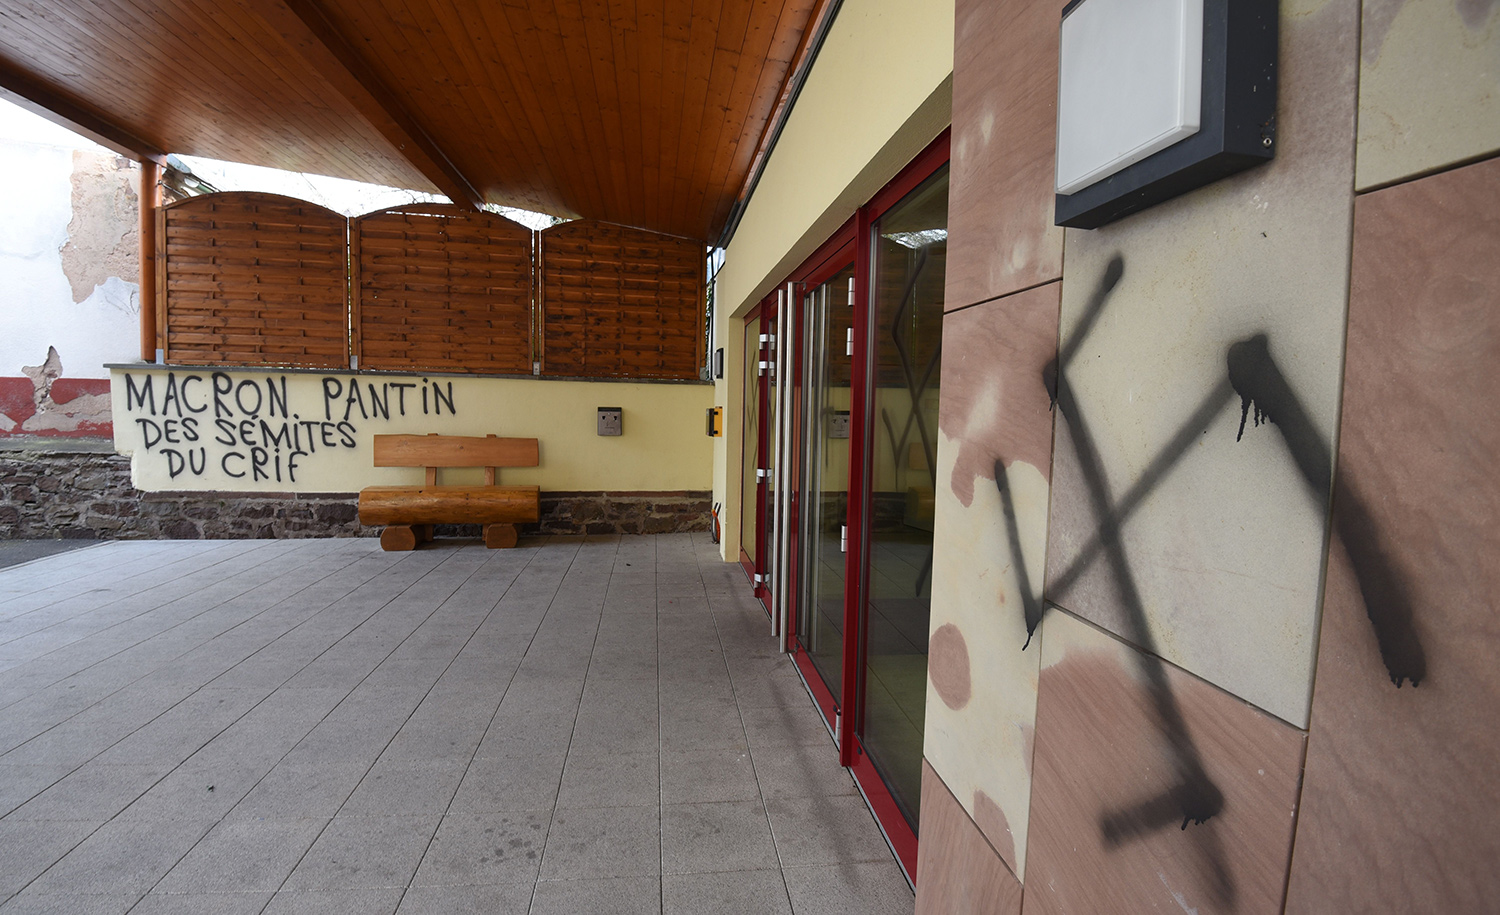 Anti-Semitic graffiti on the wall of the city hall in Heiligenberg in eastern France. PATRICK HERTZOG/AFP/Getty Images.
